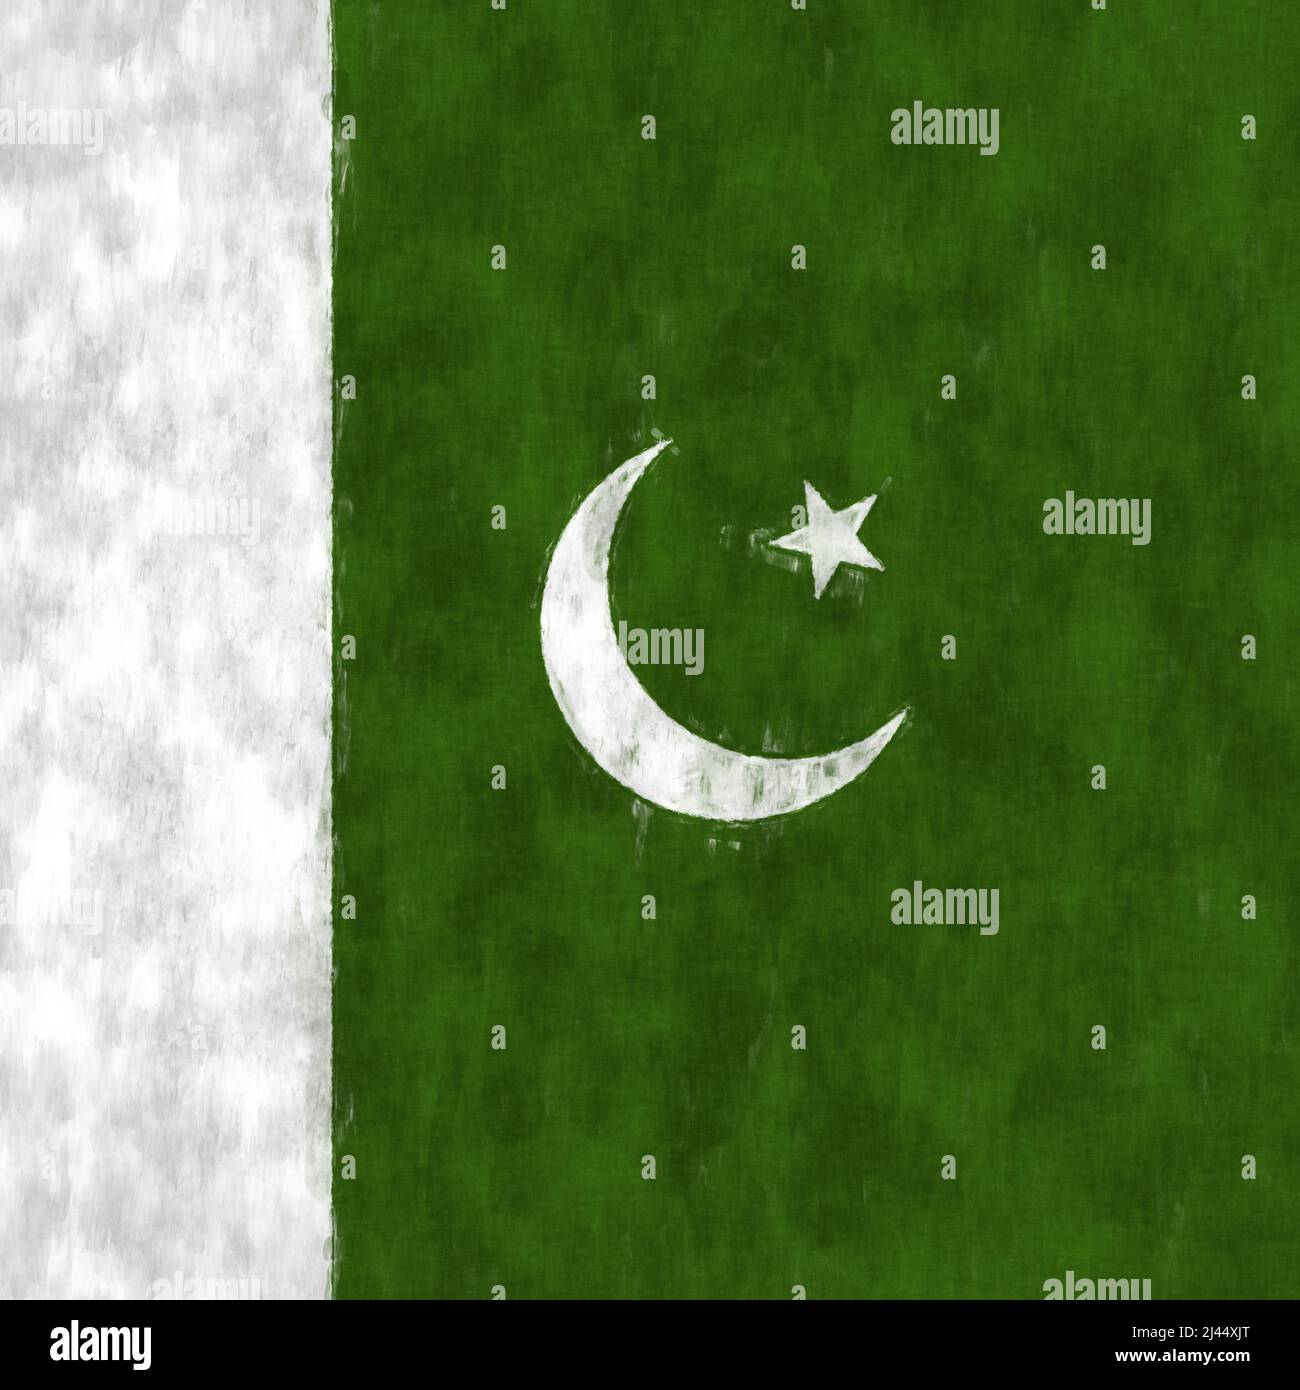 Pakistan Flag Colouring Pages - Free Colouring Pages